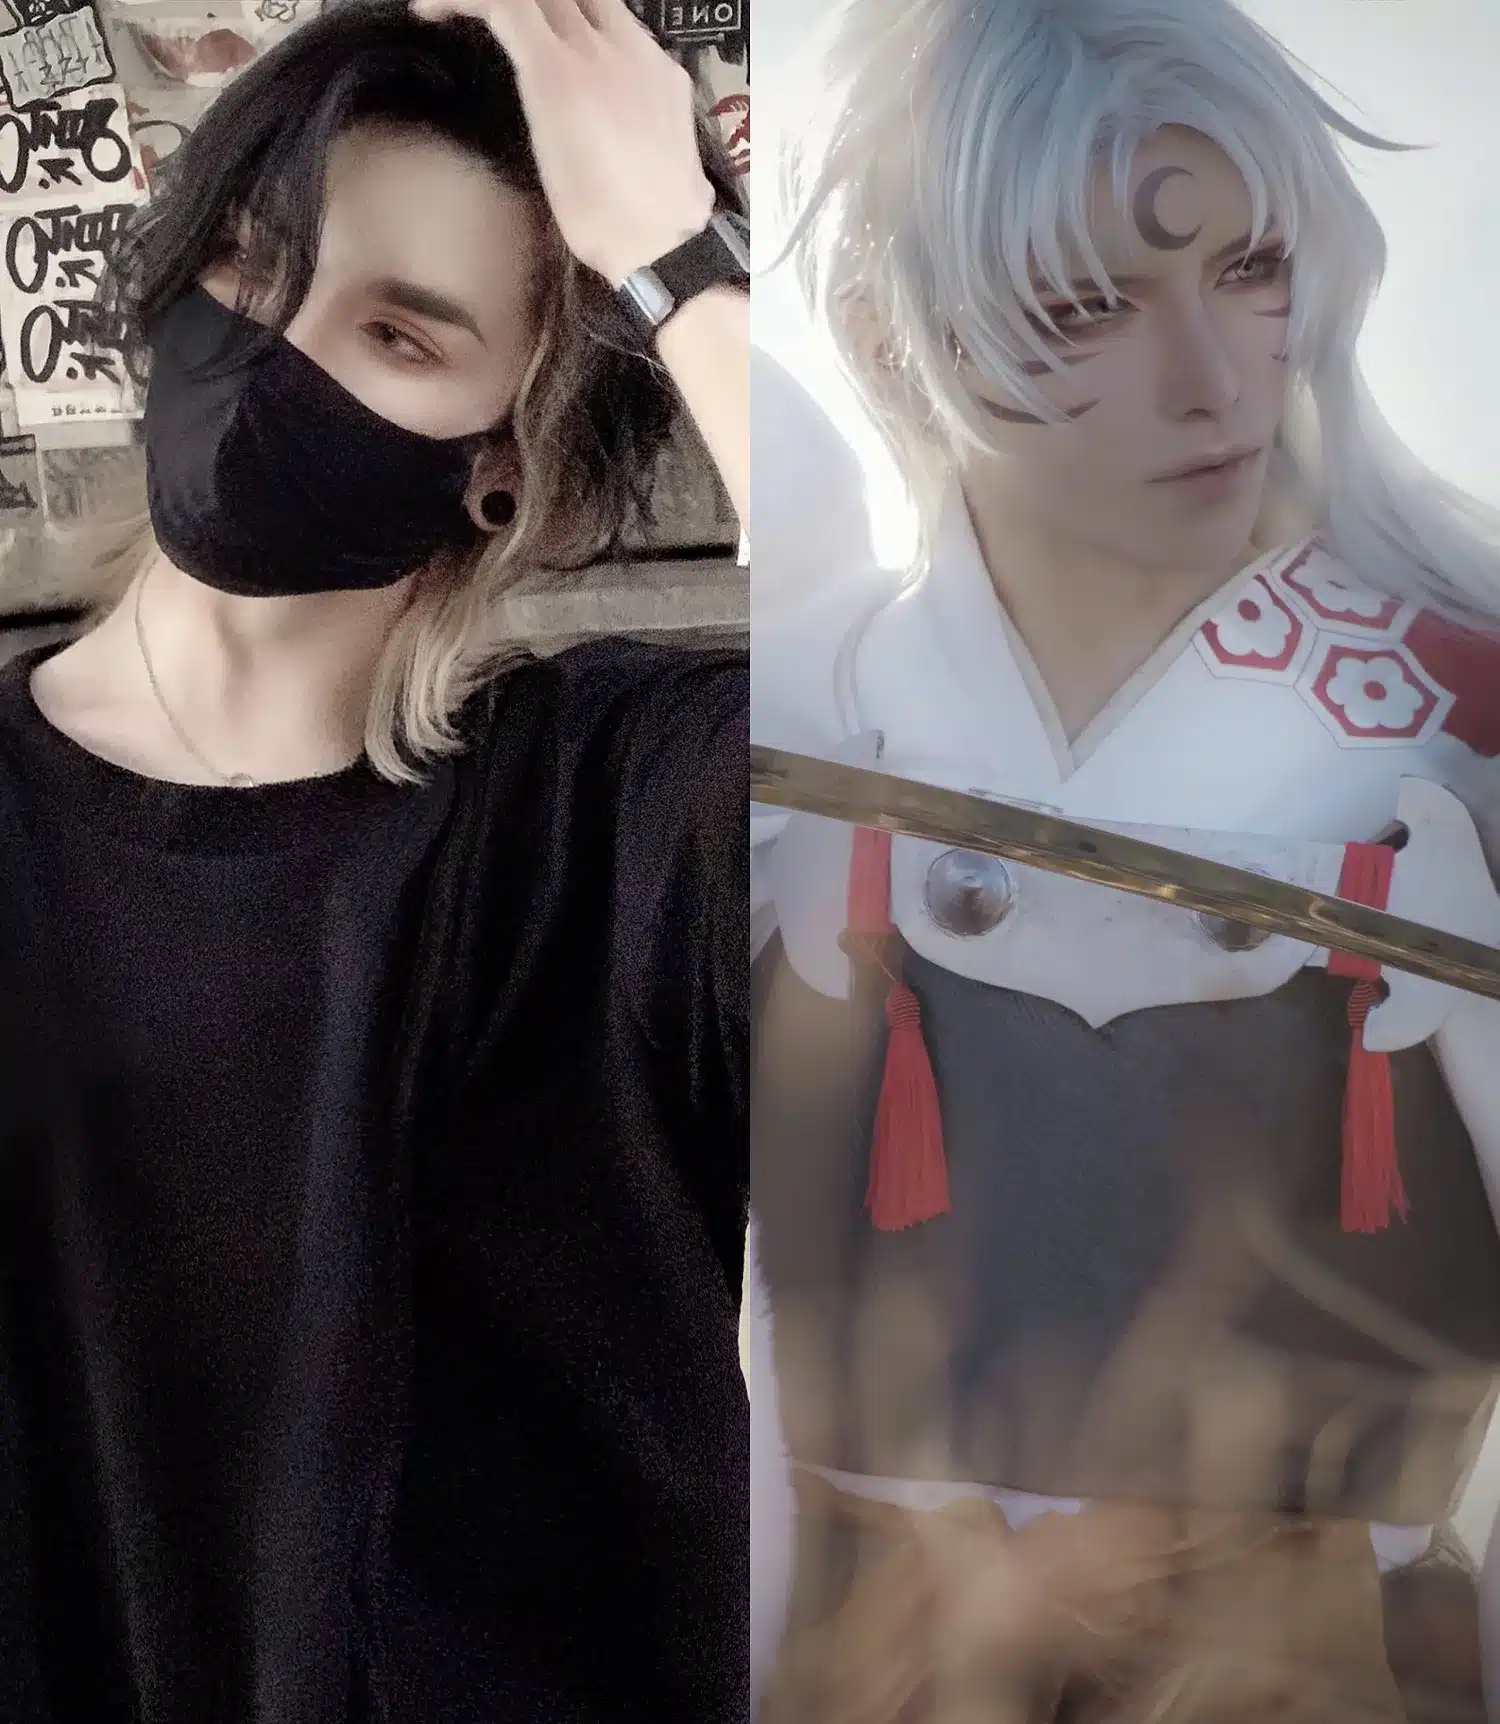 Cosplayer @Lay X 9